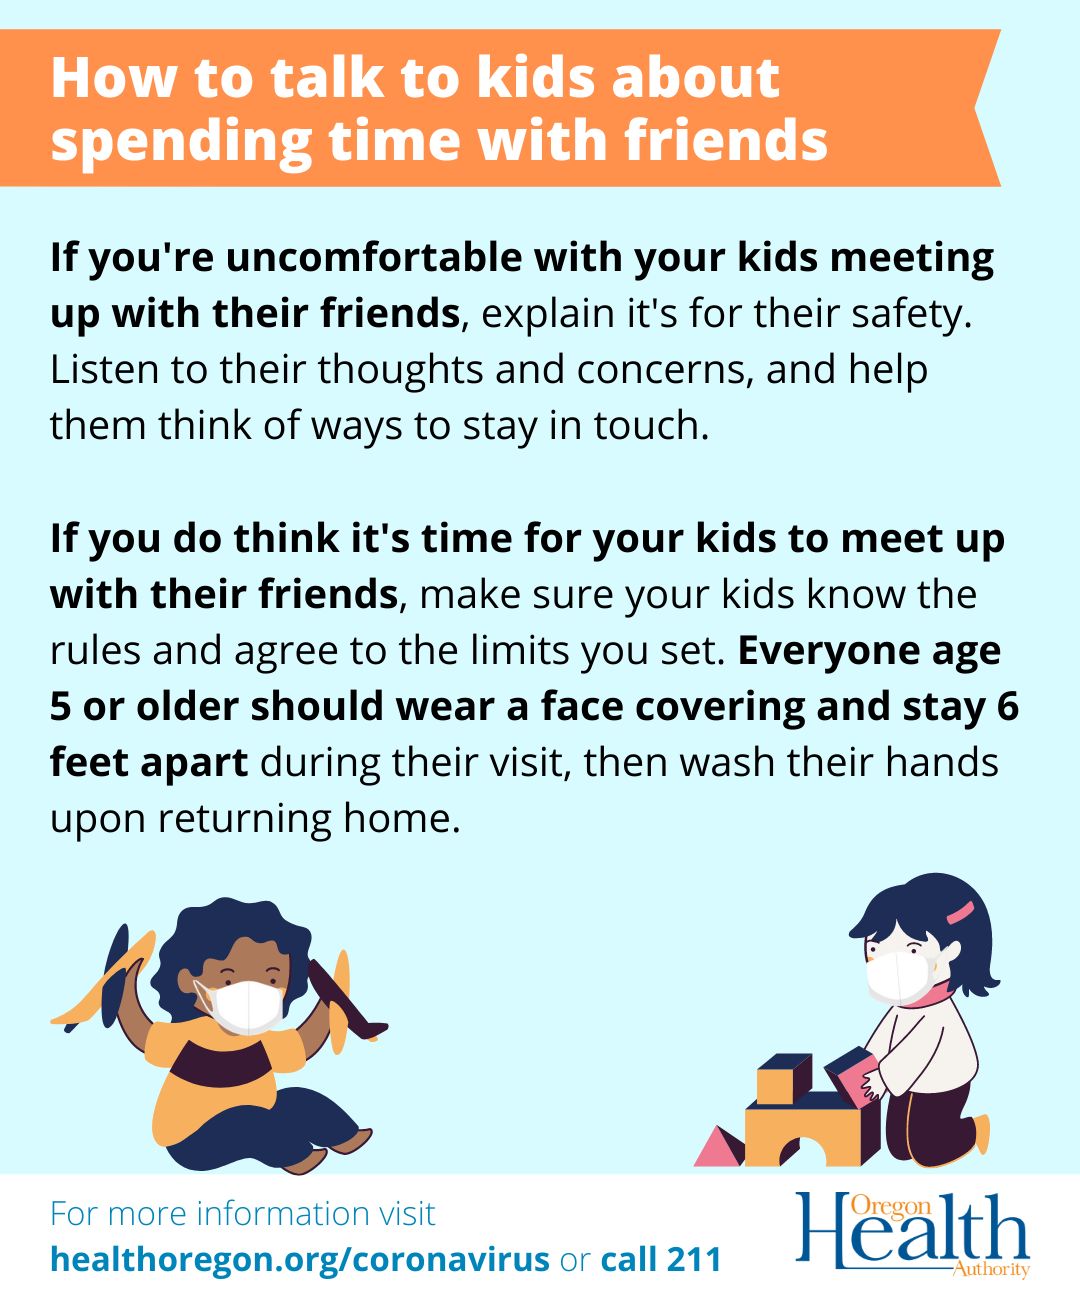 How to talk to kids about spending time with friends